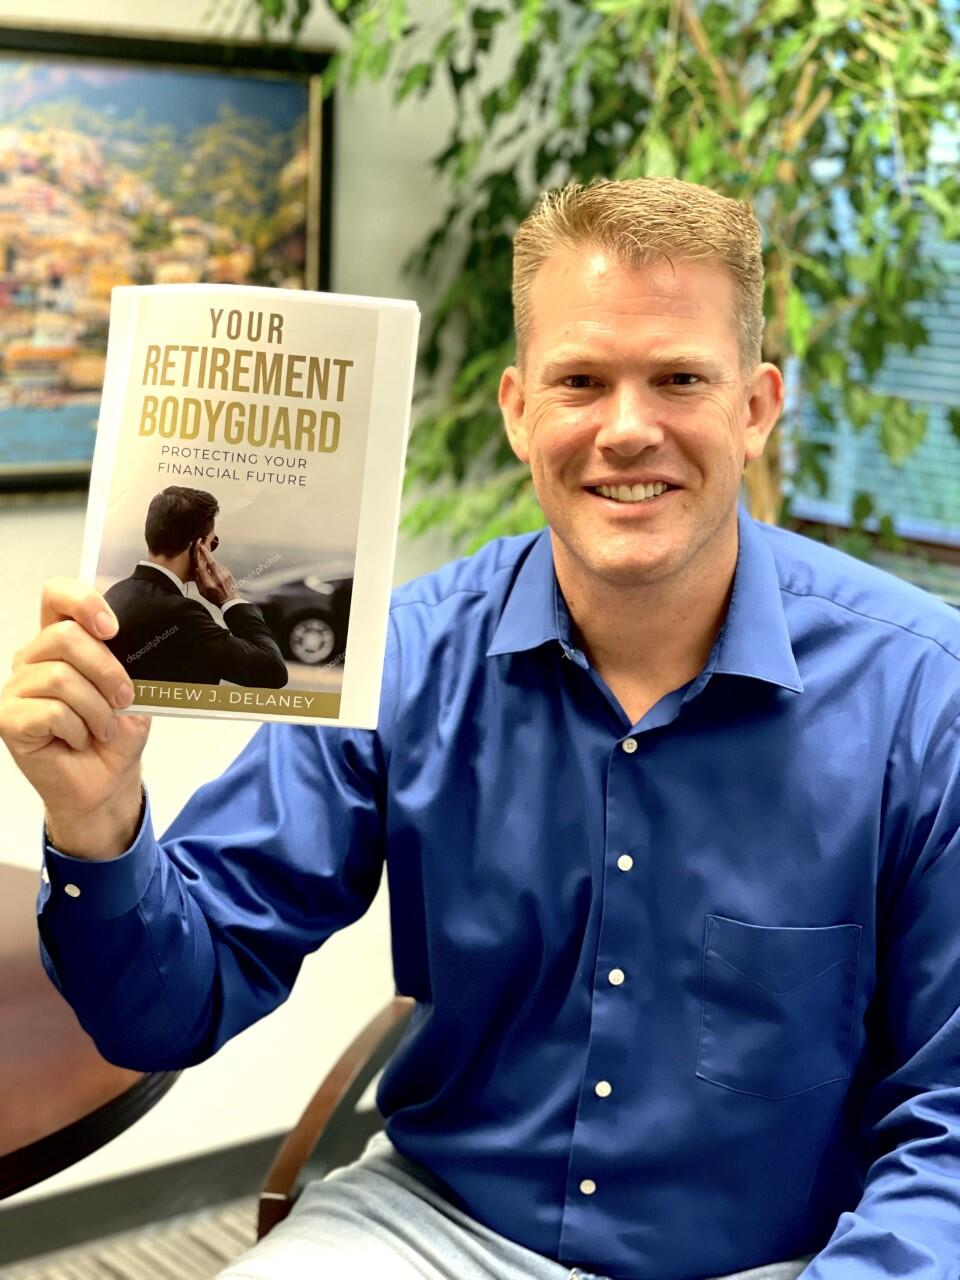 JDH Wealth adviser Matt Delaney, seen here with his book he wrote on retirement, calls the last two-year period the ‘tale of two pandemics.’ Photo courtesy of JDH Wealth